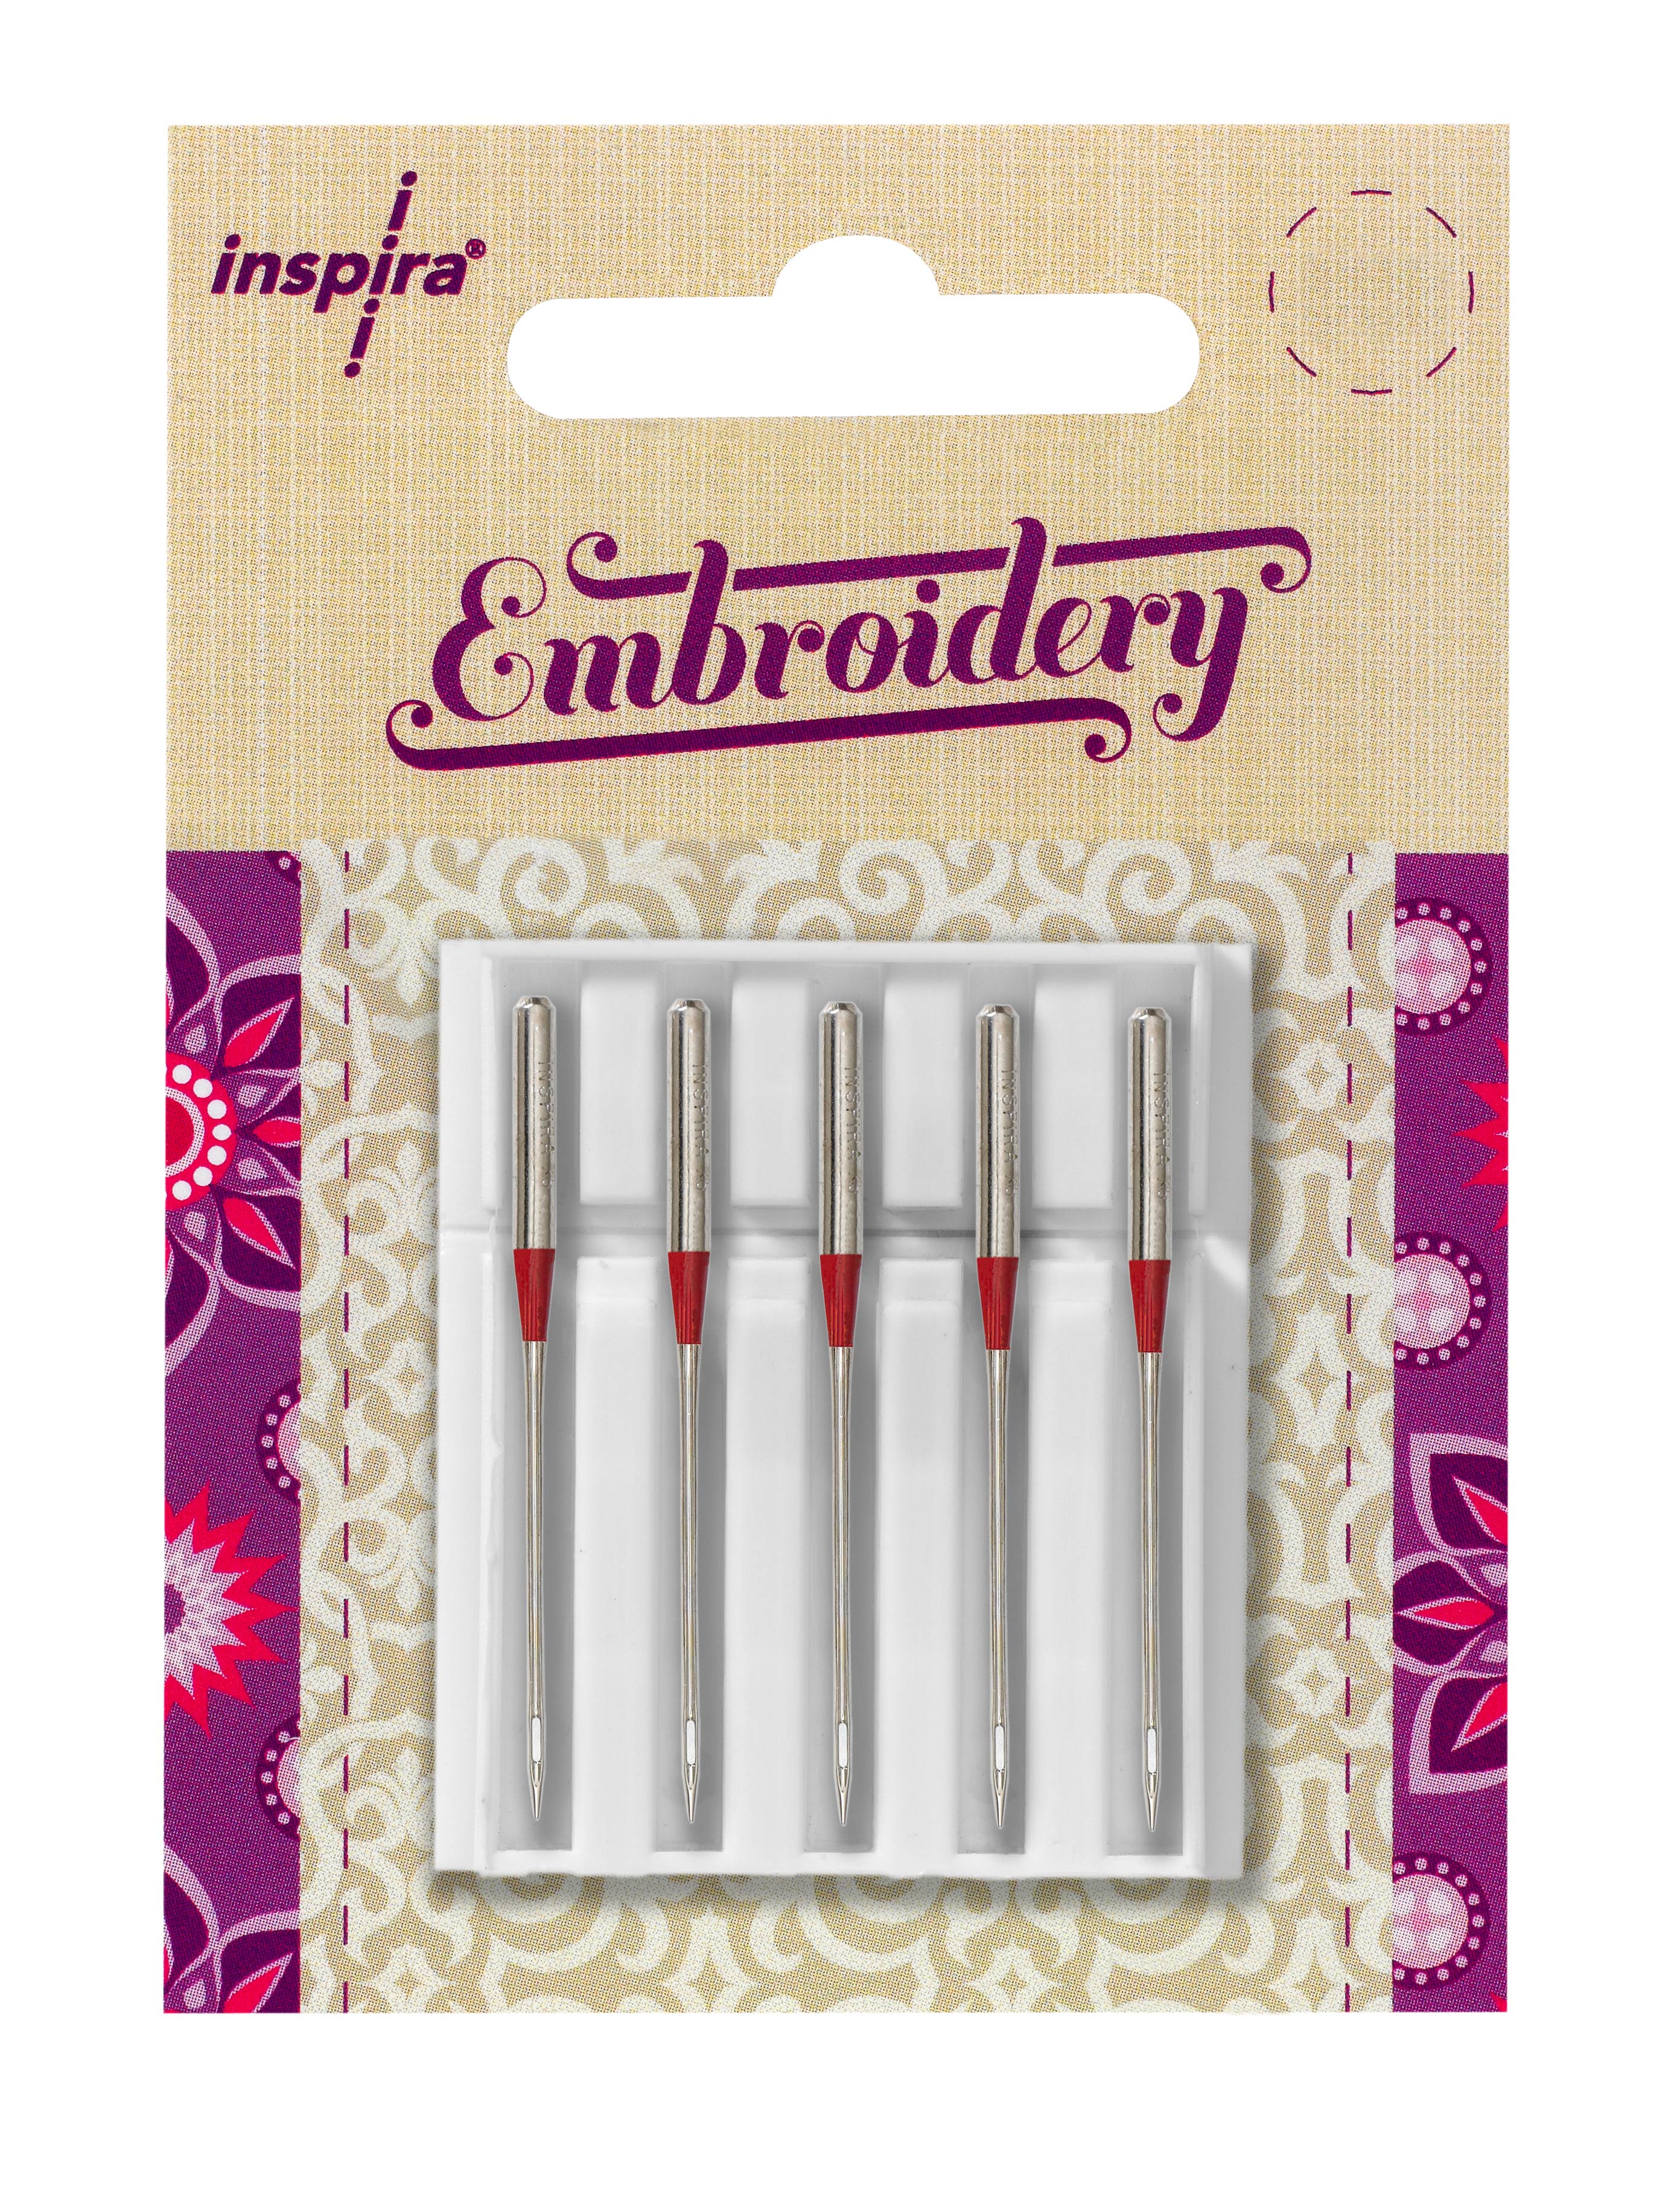 Embroidery Needles Size 90 - 5 Pack